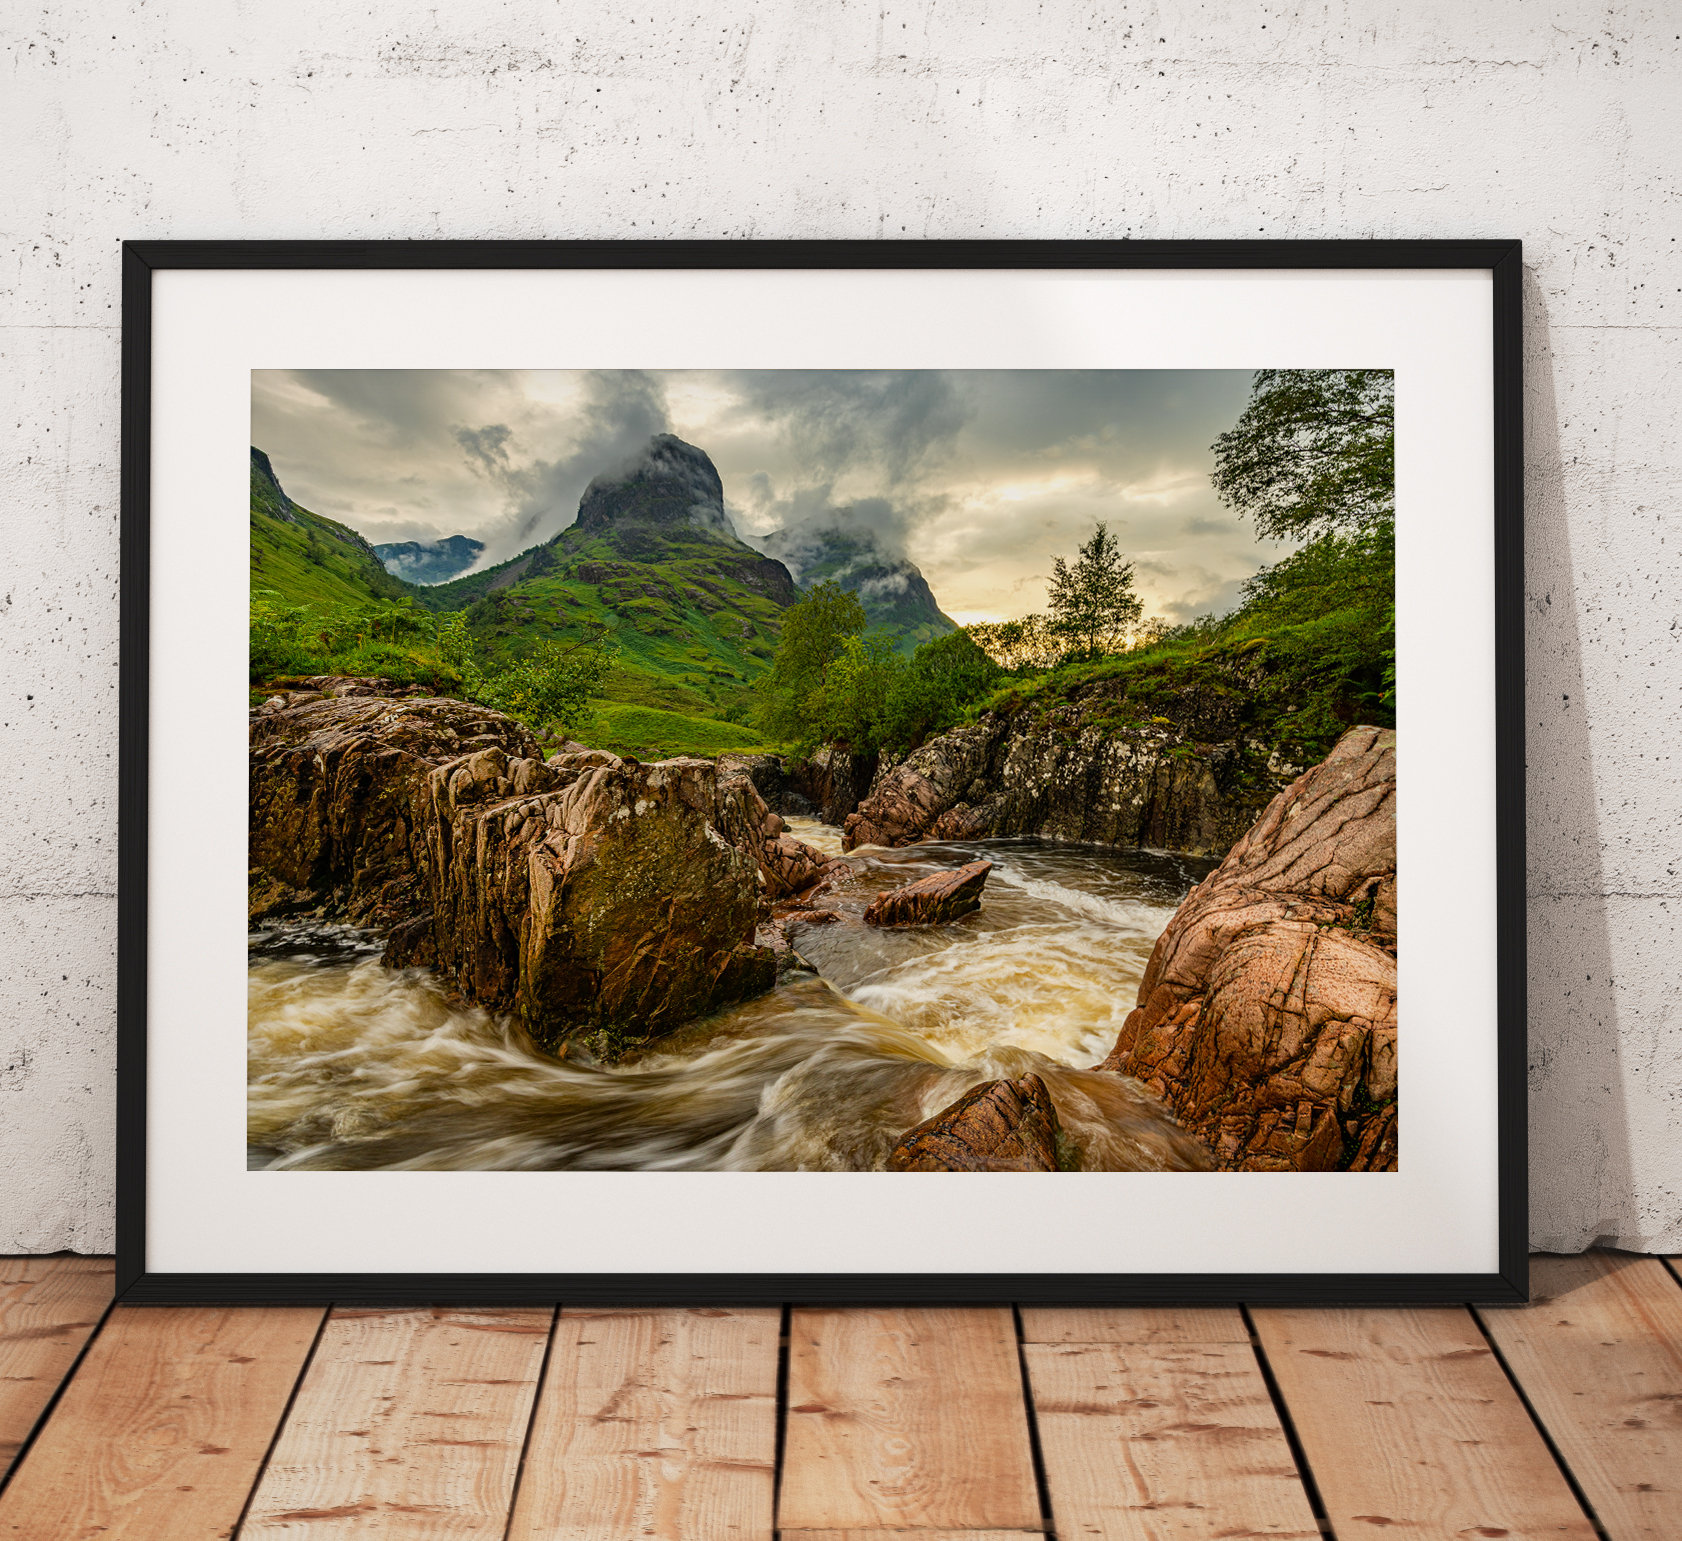 Northern Wild landscape Photography - The dramatic Three Sisters mountains in Glencoe during a storm, Scottish Highlands. Scotland. Wall Art